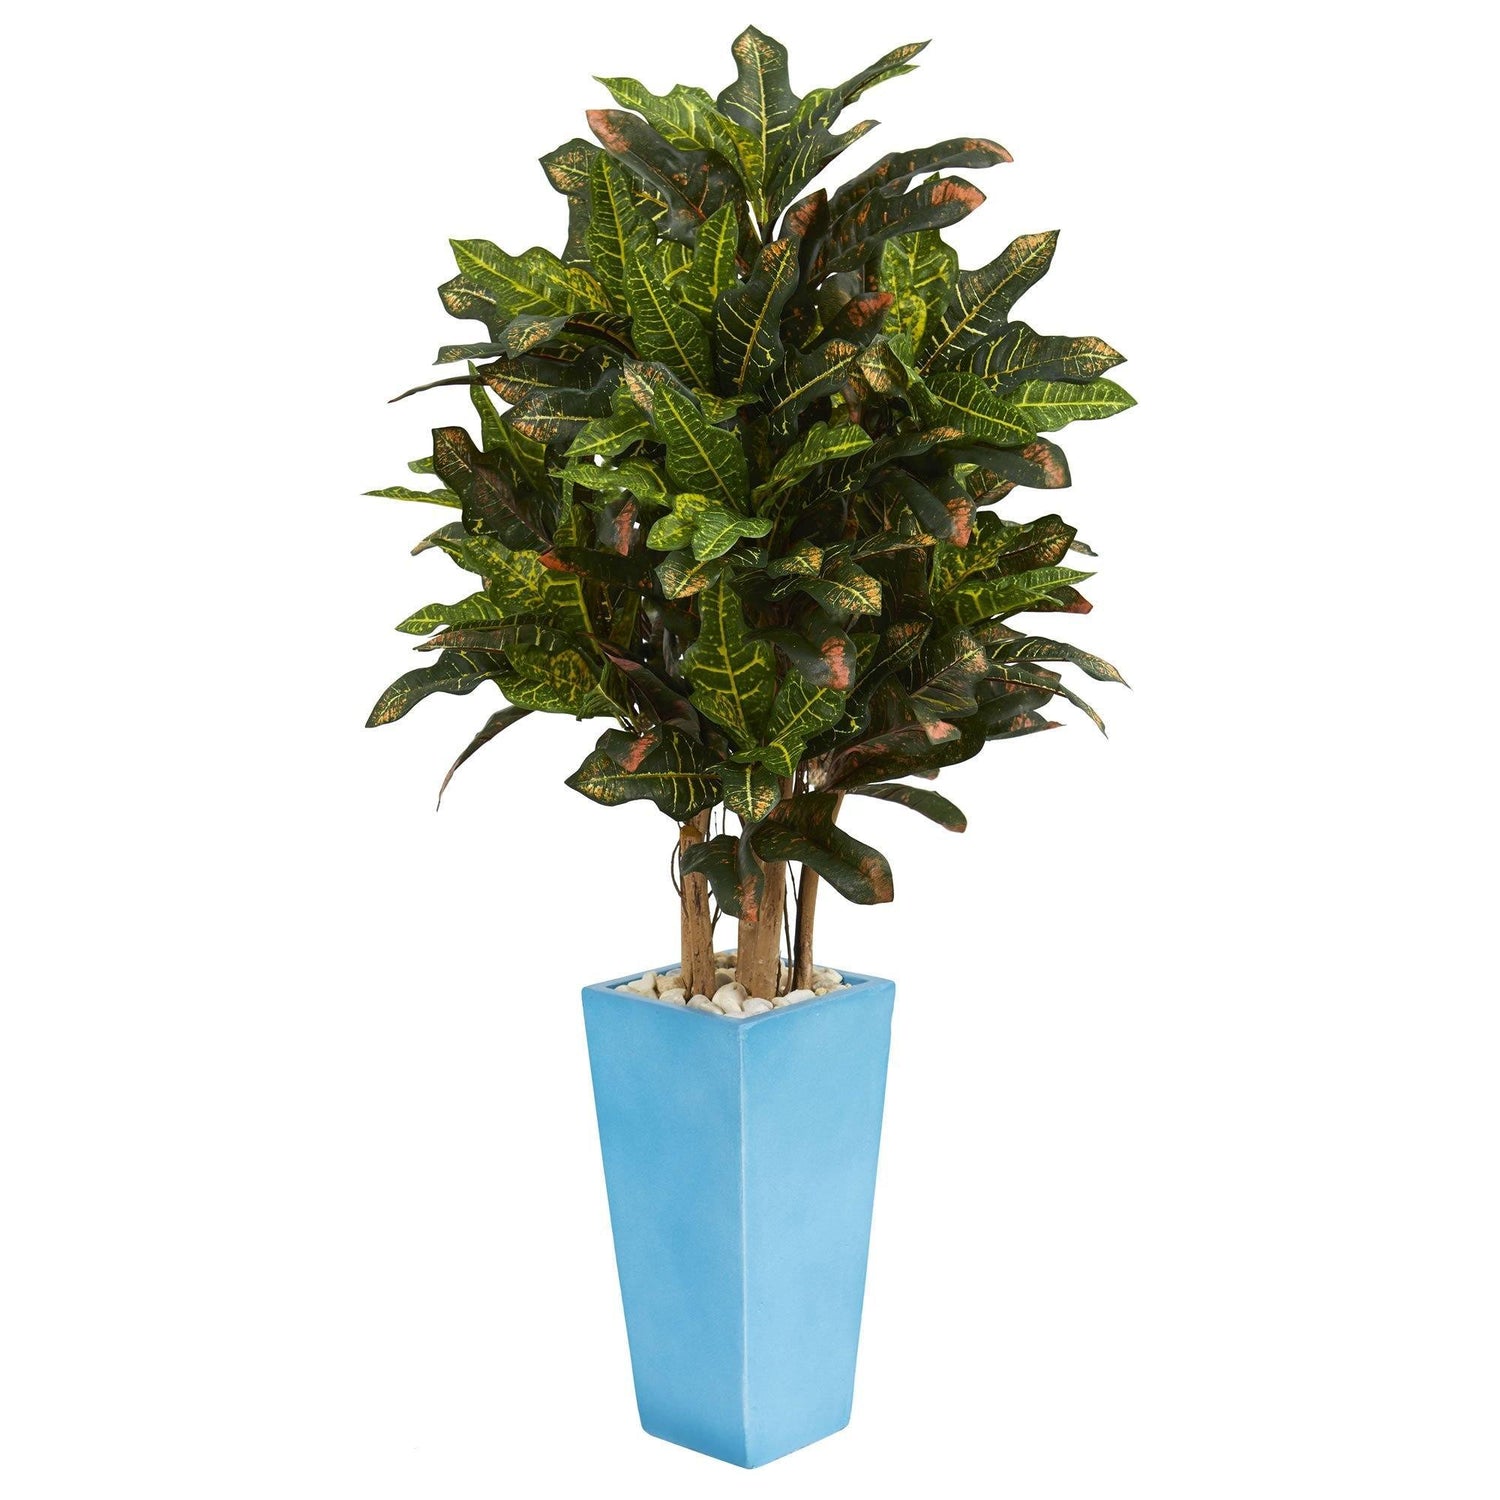 4’ Croton Artificial Plant in Turquoise Planter